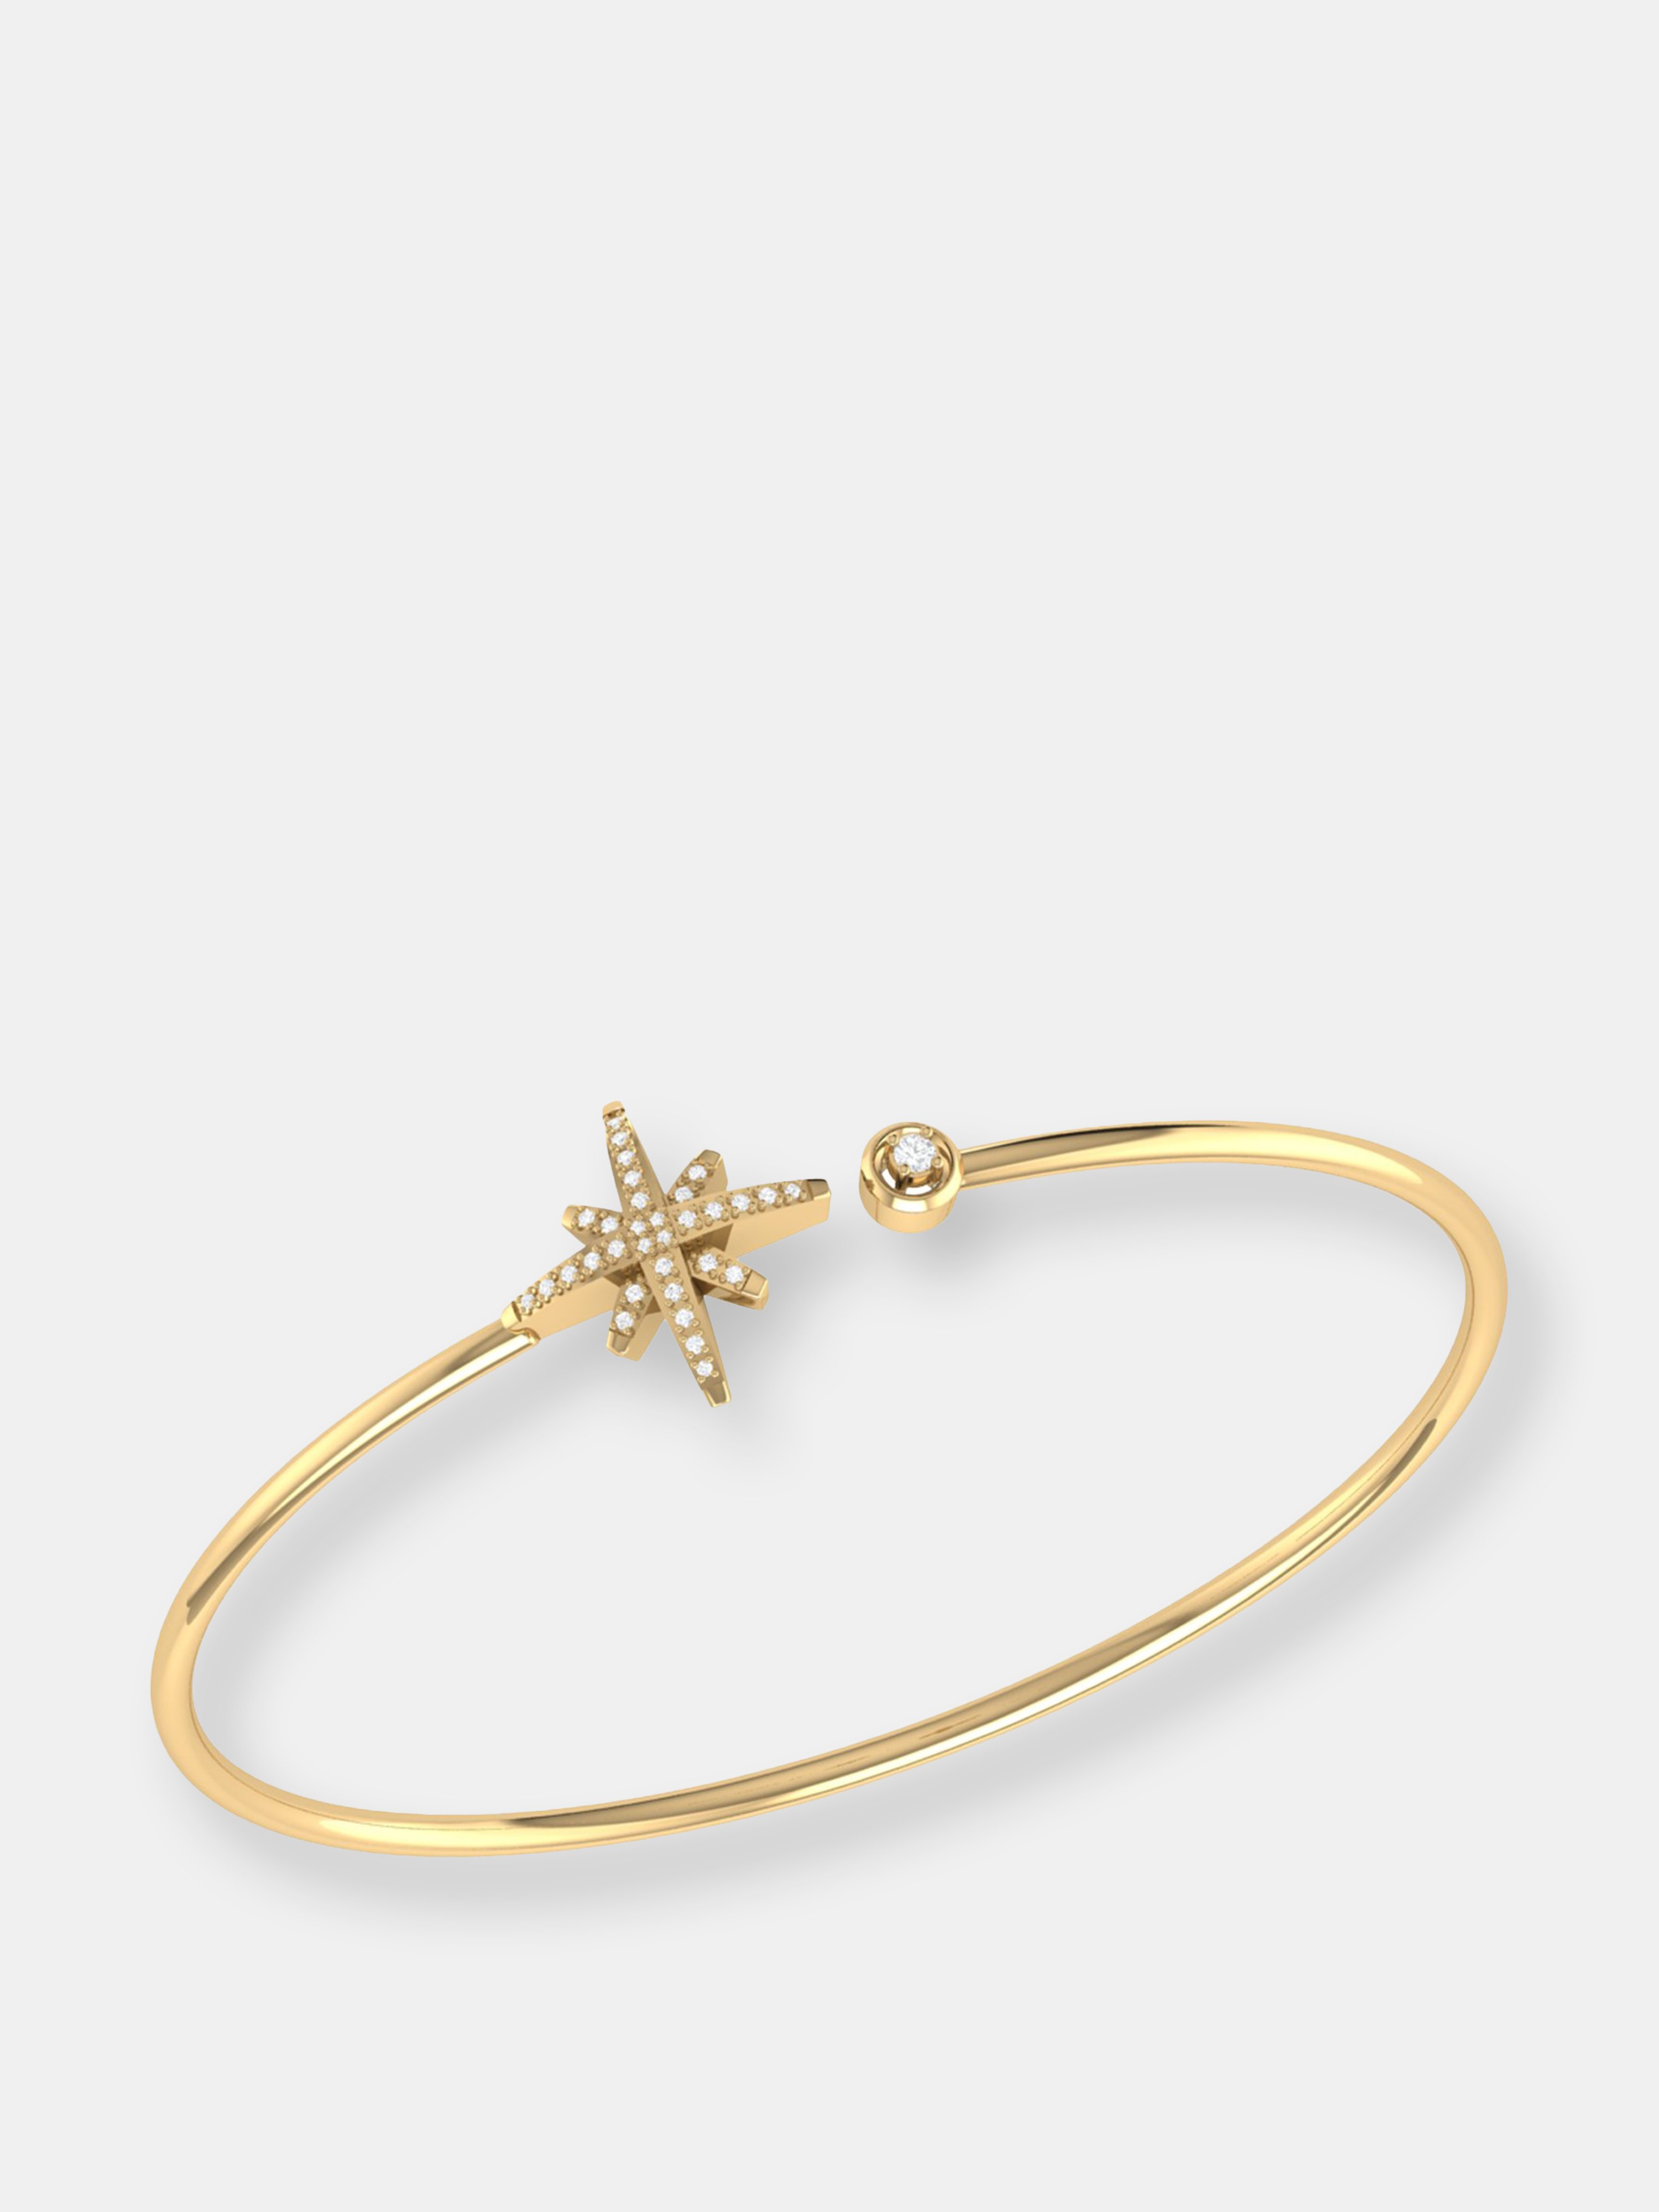 Luvmyjewelry North Star Adjustable Diamond Cuff In 14k Yellow Gold Vermeil On Sterling Silver